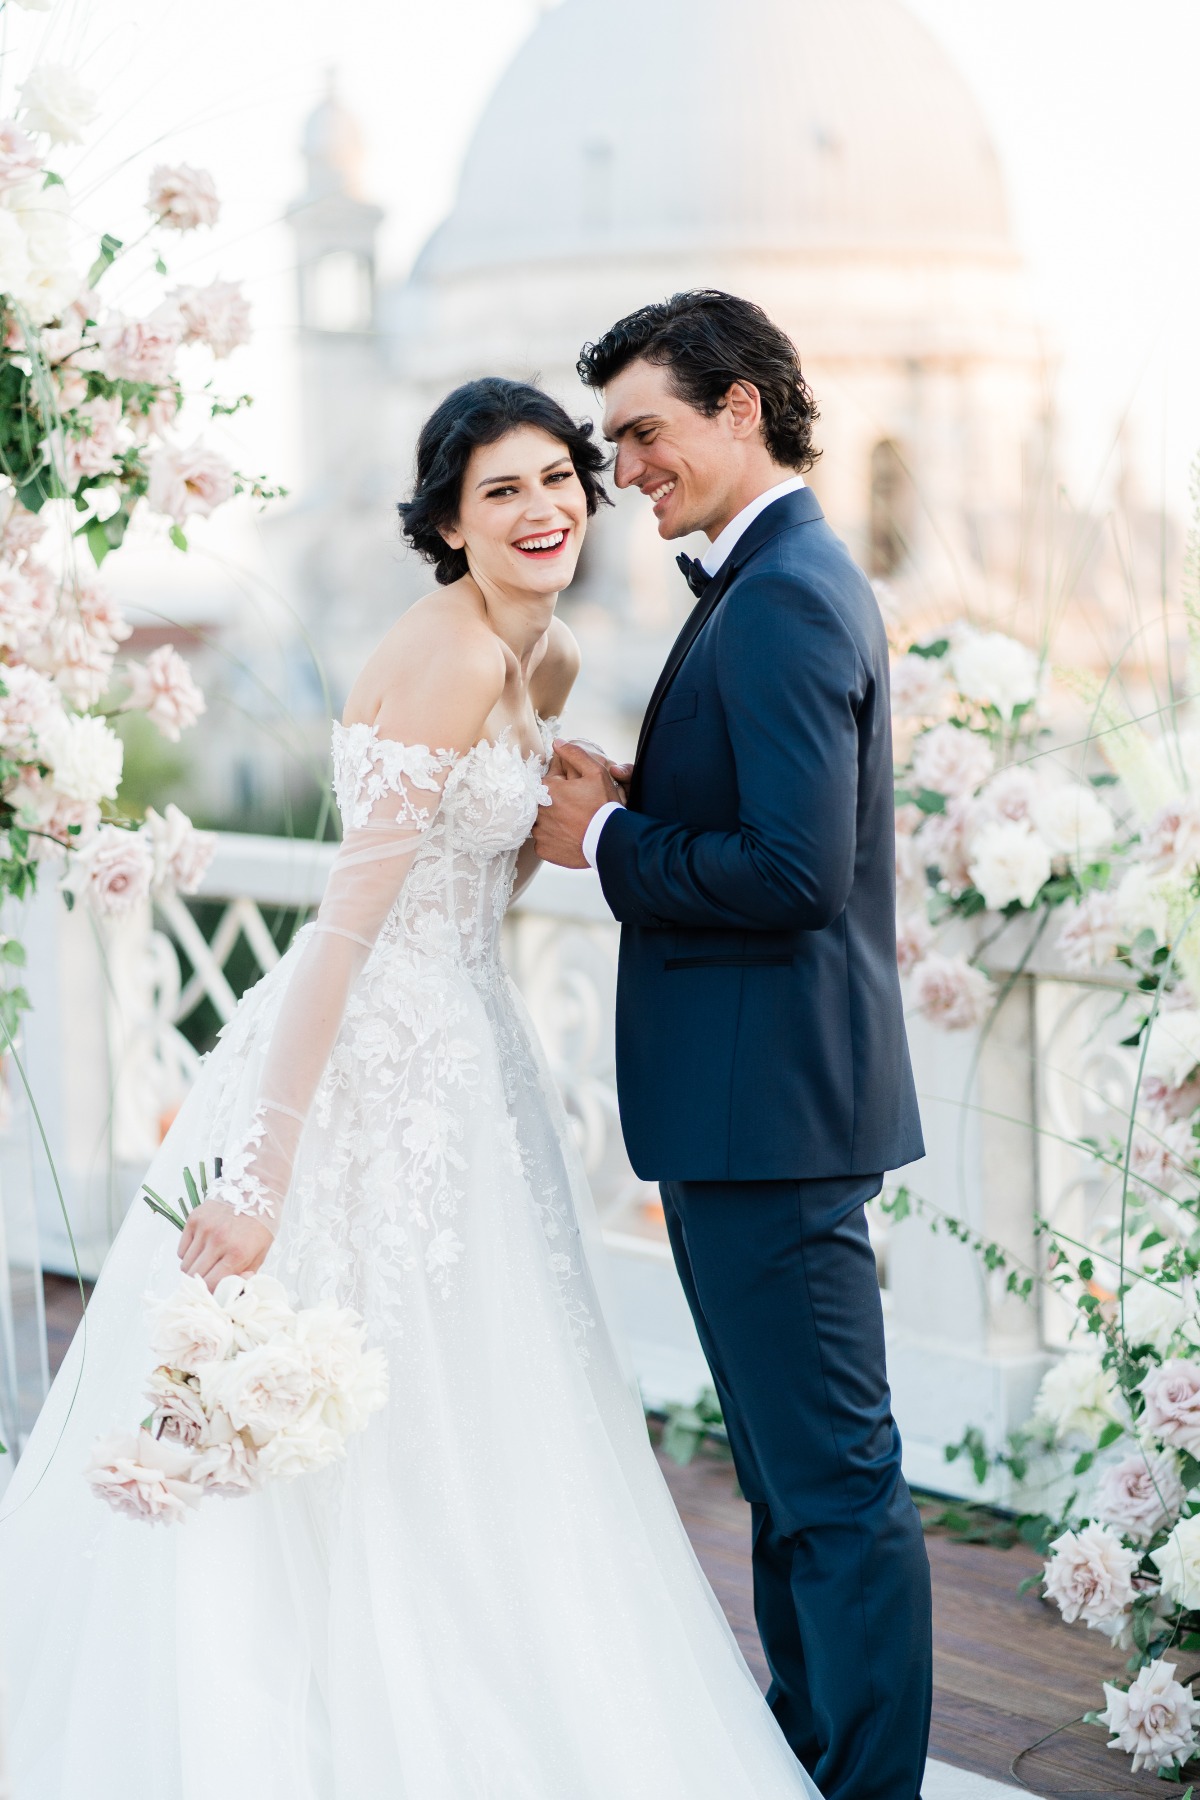 Intimate fairytale Wedding in the heart of Venice